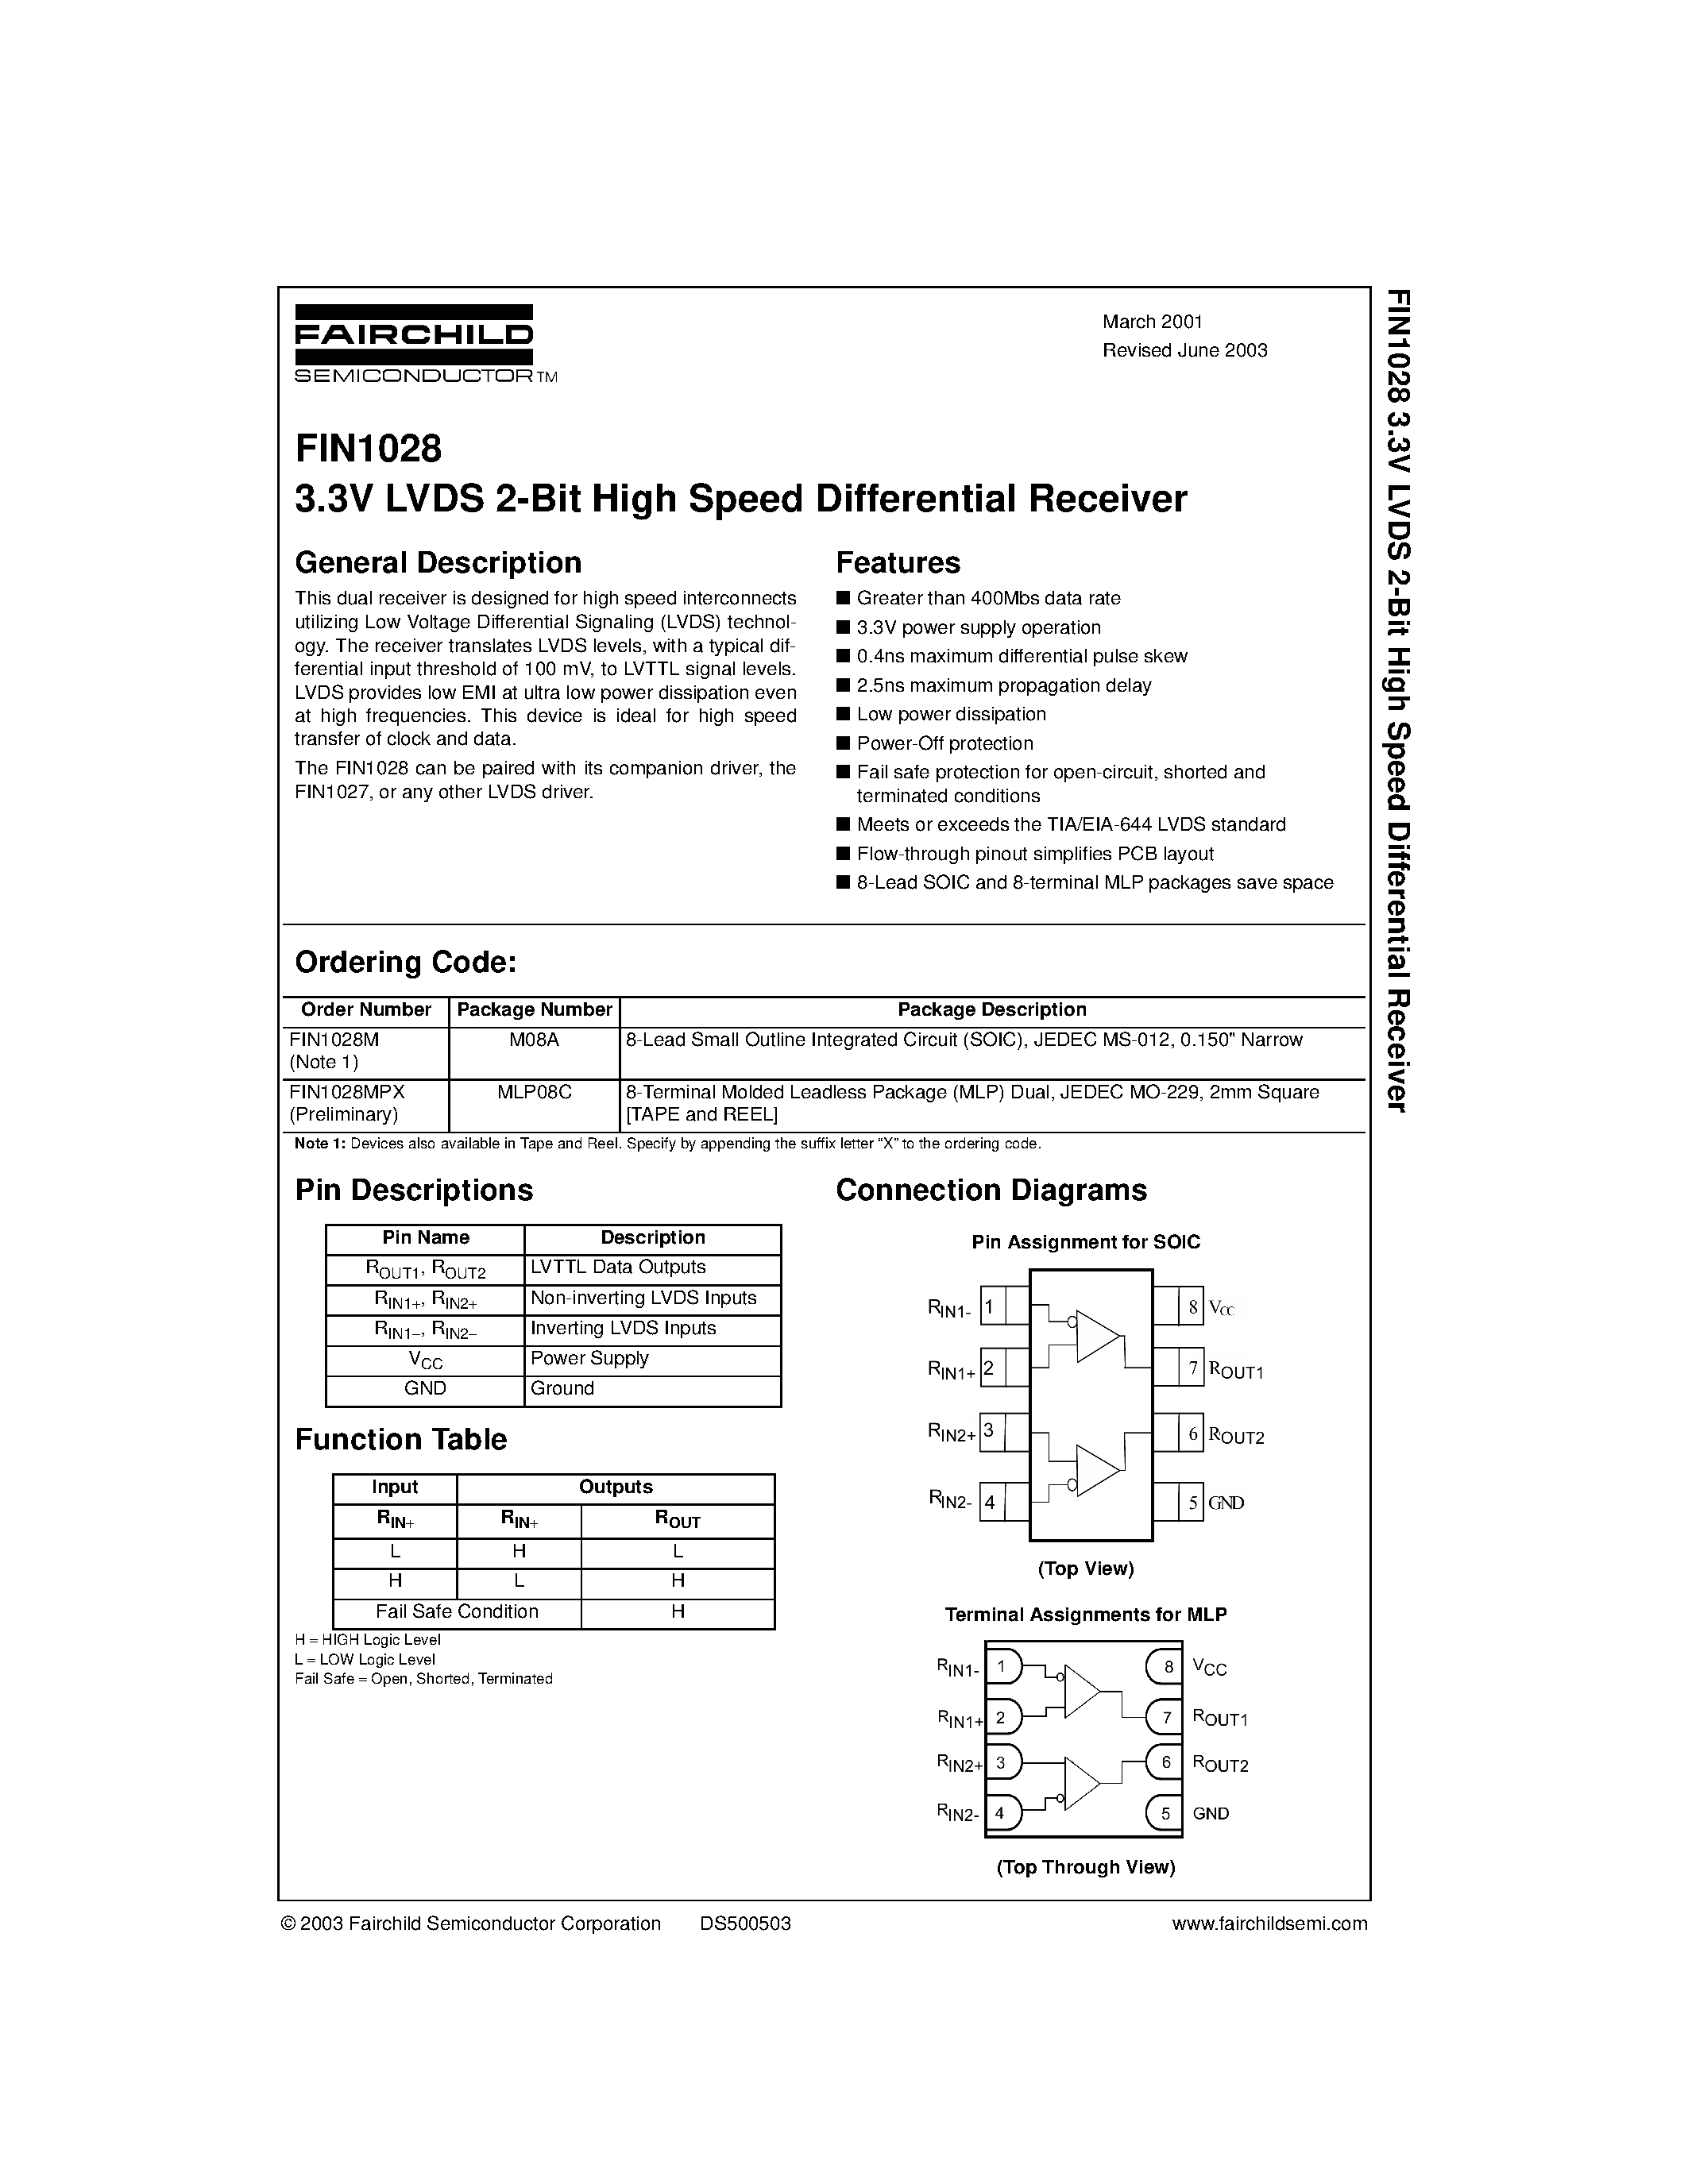 Datasheet FIN1028MPX - 3.3V LVDS 2-Bit High Speed Differential Receiver page 1